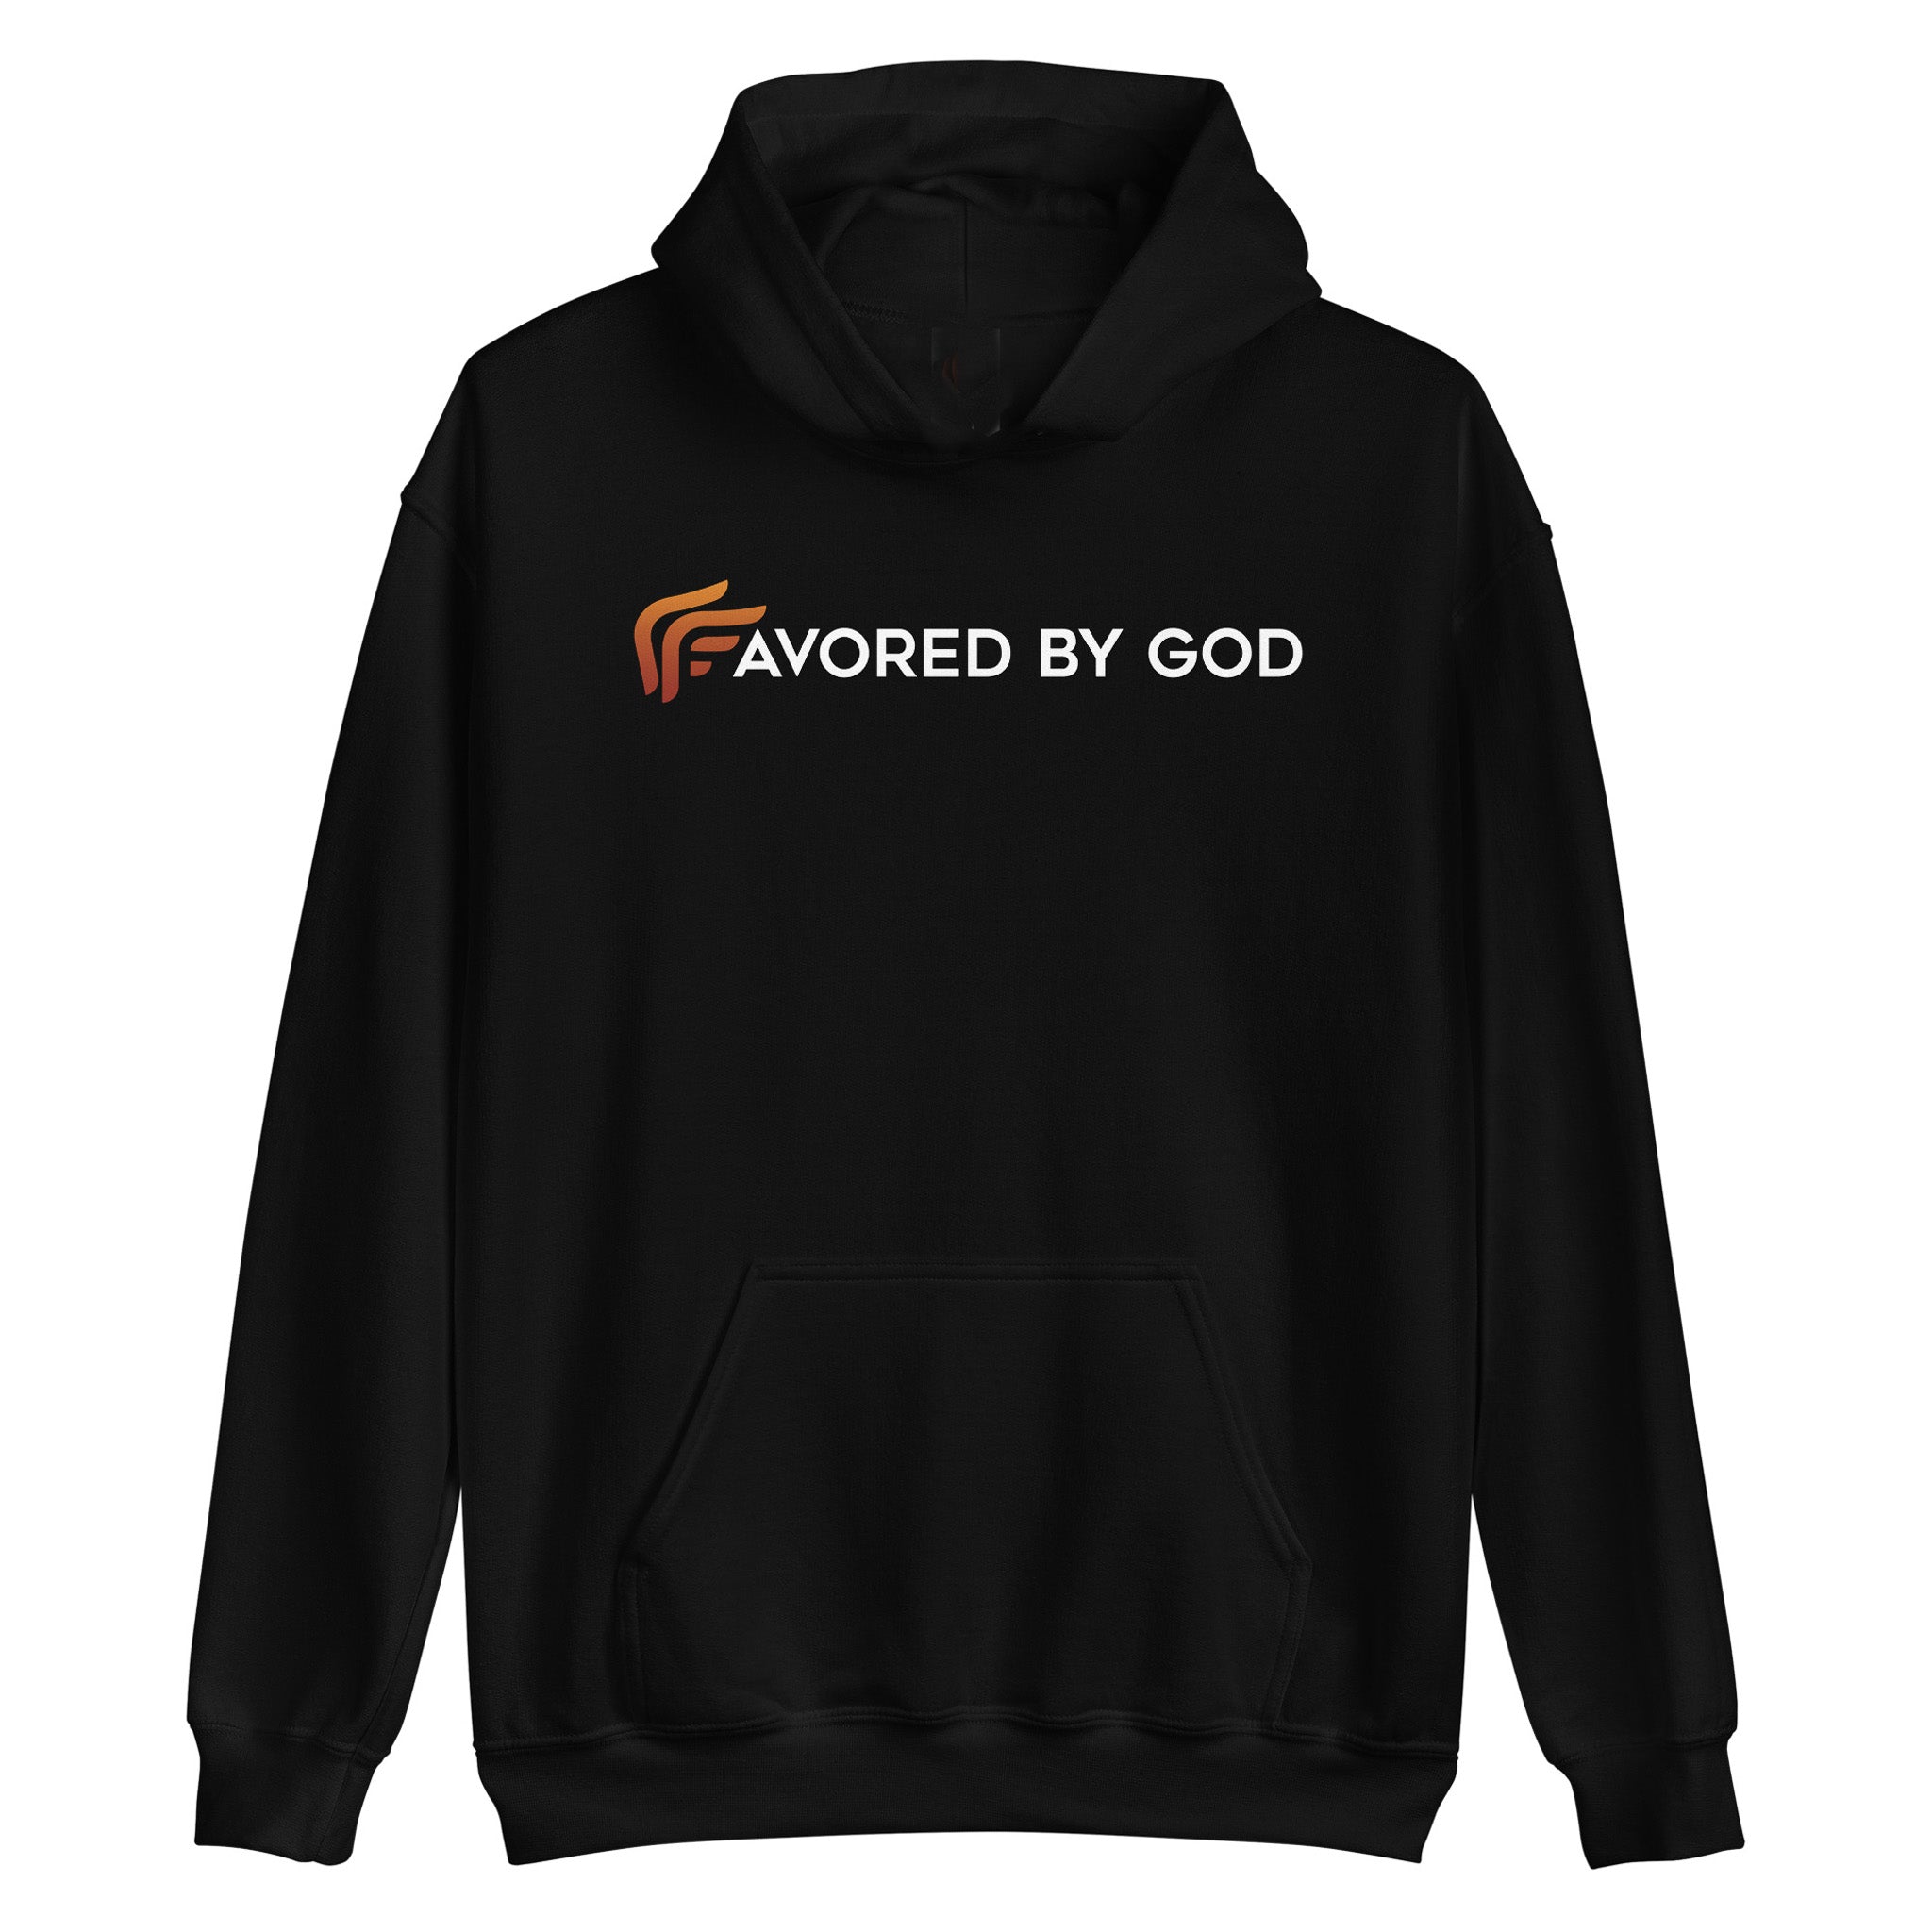 Signature Favored By God Hoodie, Used By God, Used By God Clothing, Christian Apparel, Christian Hoodies, Christian Clothing, Christian Shirts, God Shirts, Christian Sweatshirts, God Clothing, Jesus Hoodie, christian clothing t shirts, Jesus Clothes, t-shirts about jesus, hoodies near me, Christian Tshirts, God Is Dope, Art Of Homage, Red Letter Clothing, Elevated Faith, Active Faith Sports, Beacon Threads, God The Father Apparel